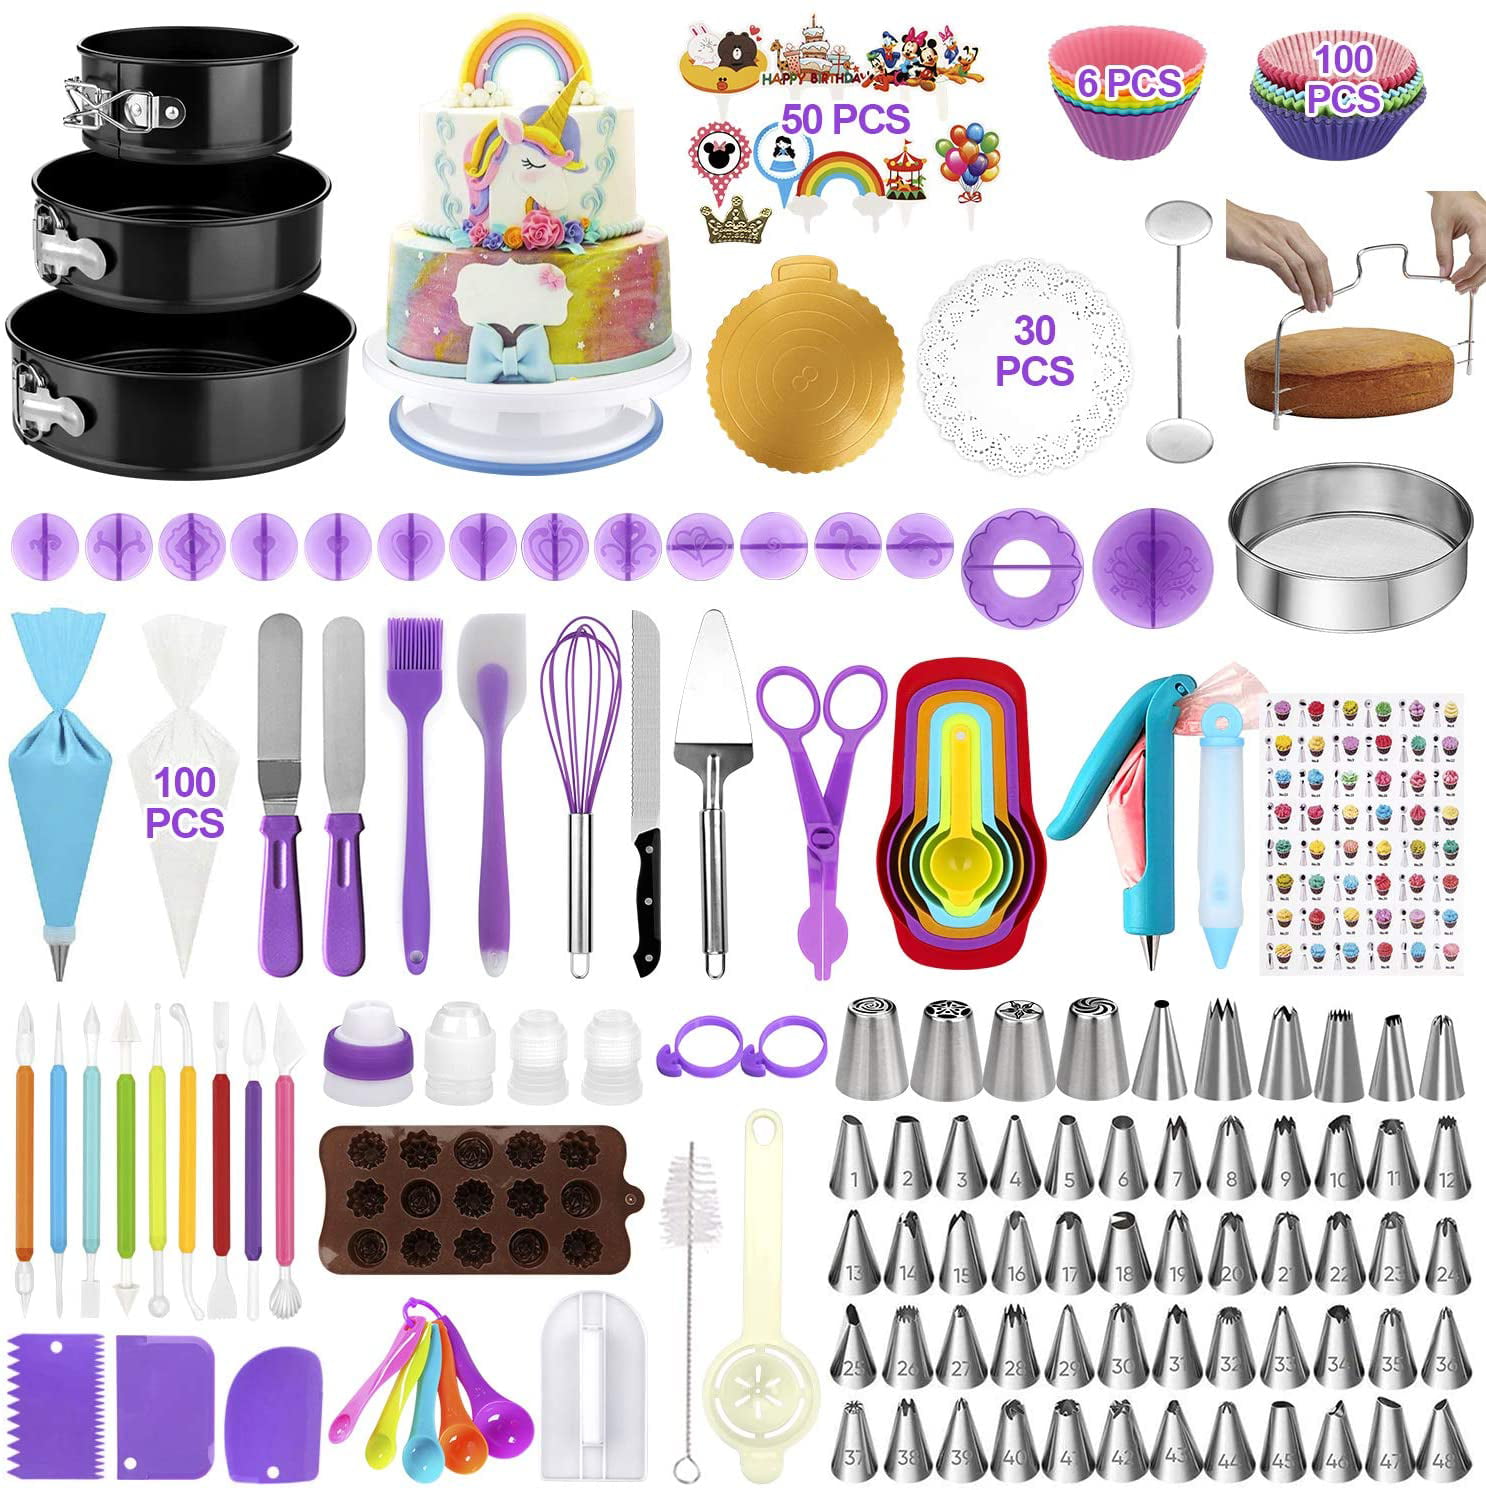 Piping Nozzles Kit for Cake Decorating Tool Large Stainless Steel Icing Piping Tips for Baking Fondant Cupcake Pastry 27 Pcs 